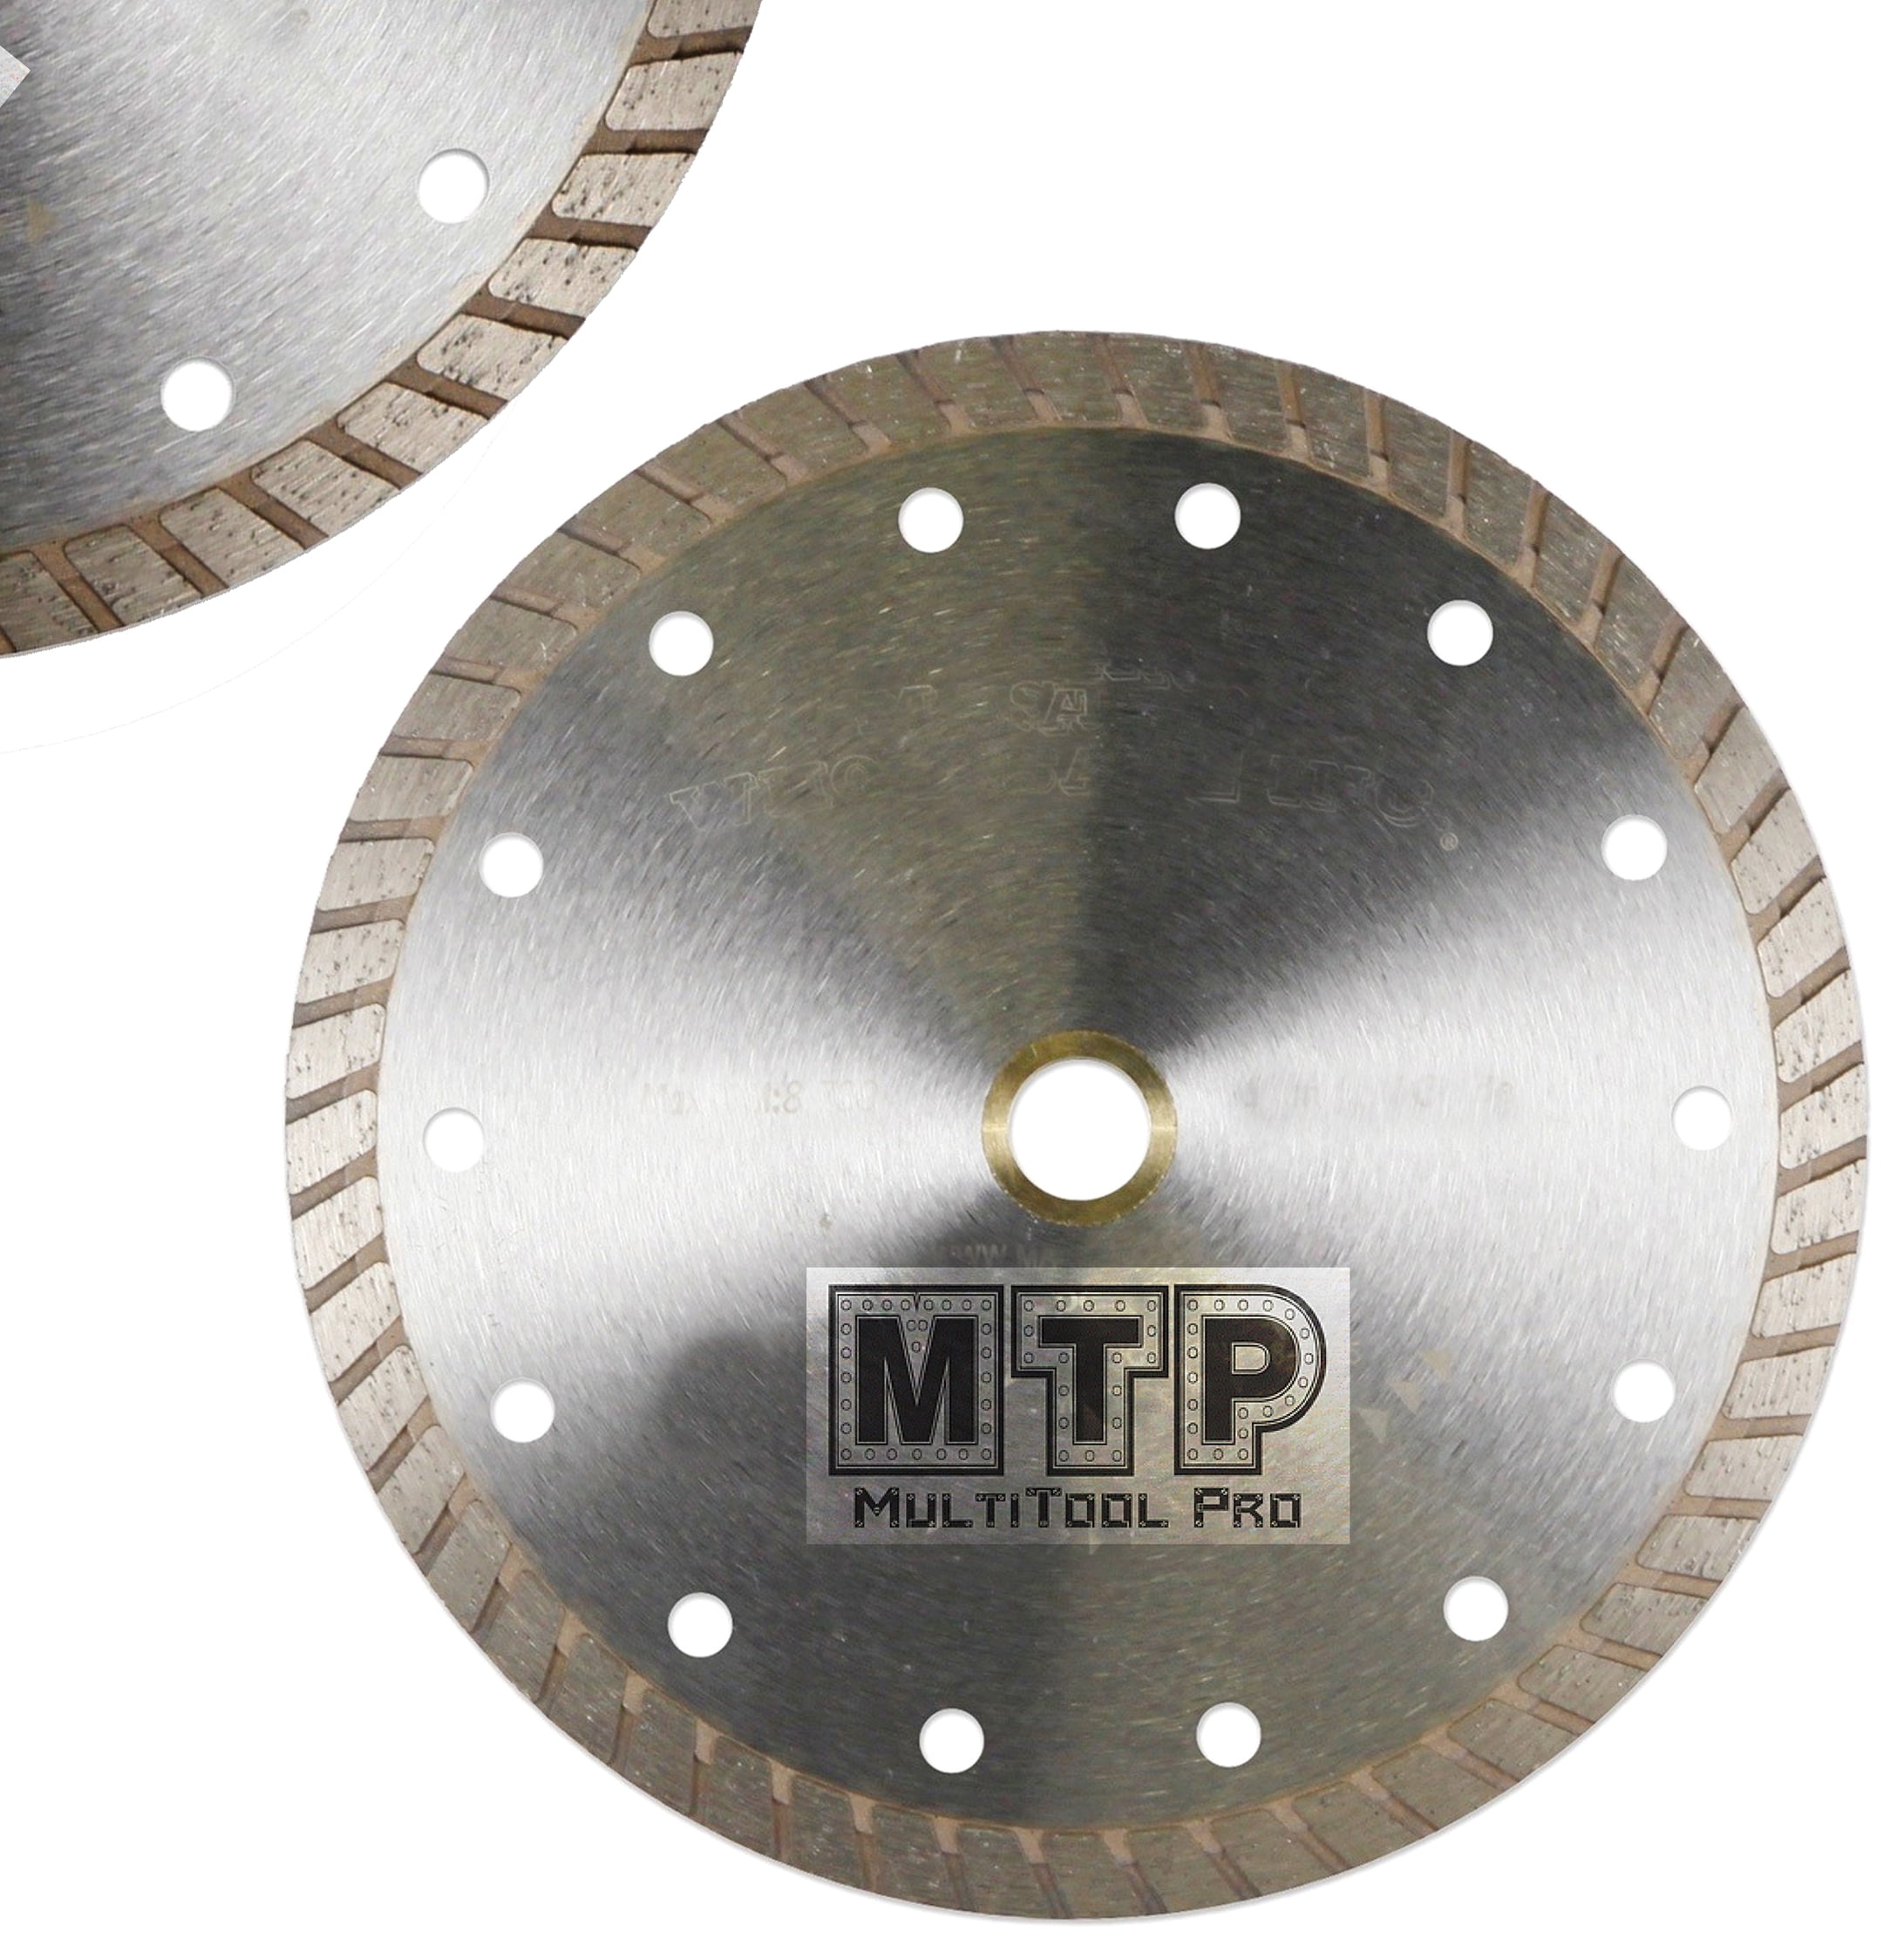 7 Inch Dry or Wet Cutting Segmented Saw Blade with /Concrete and Brick 5/8 arbor 